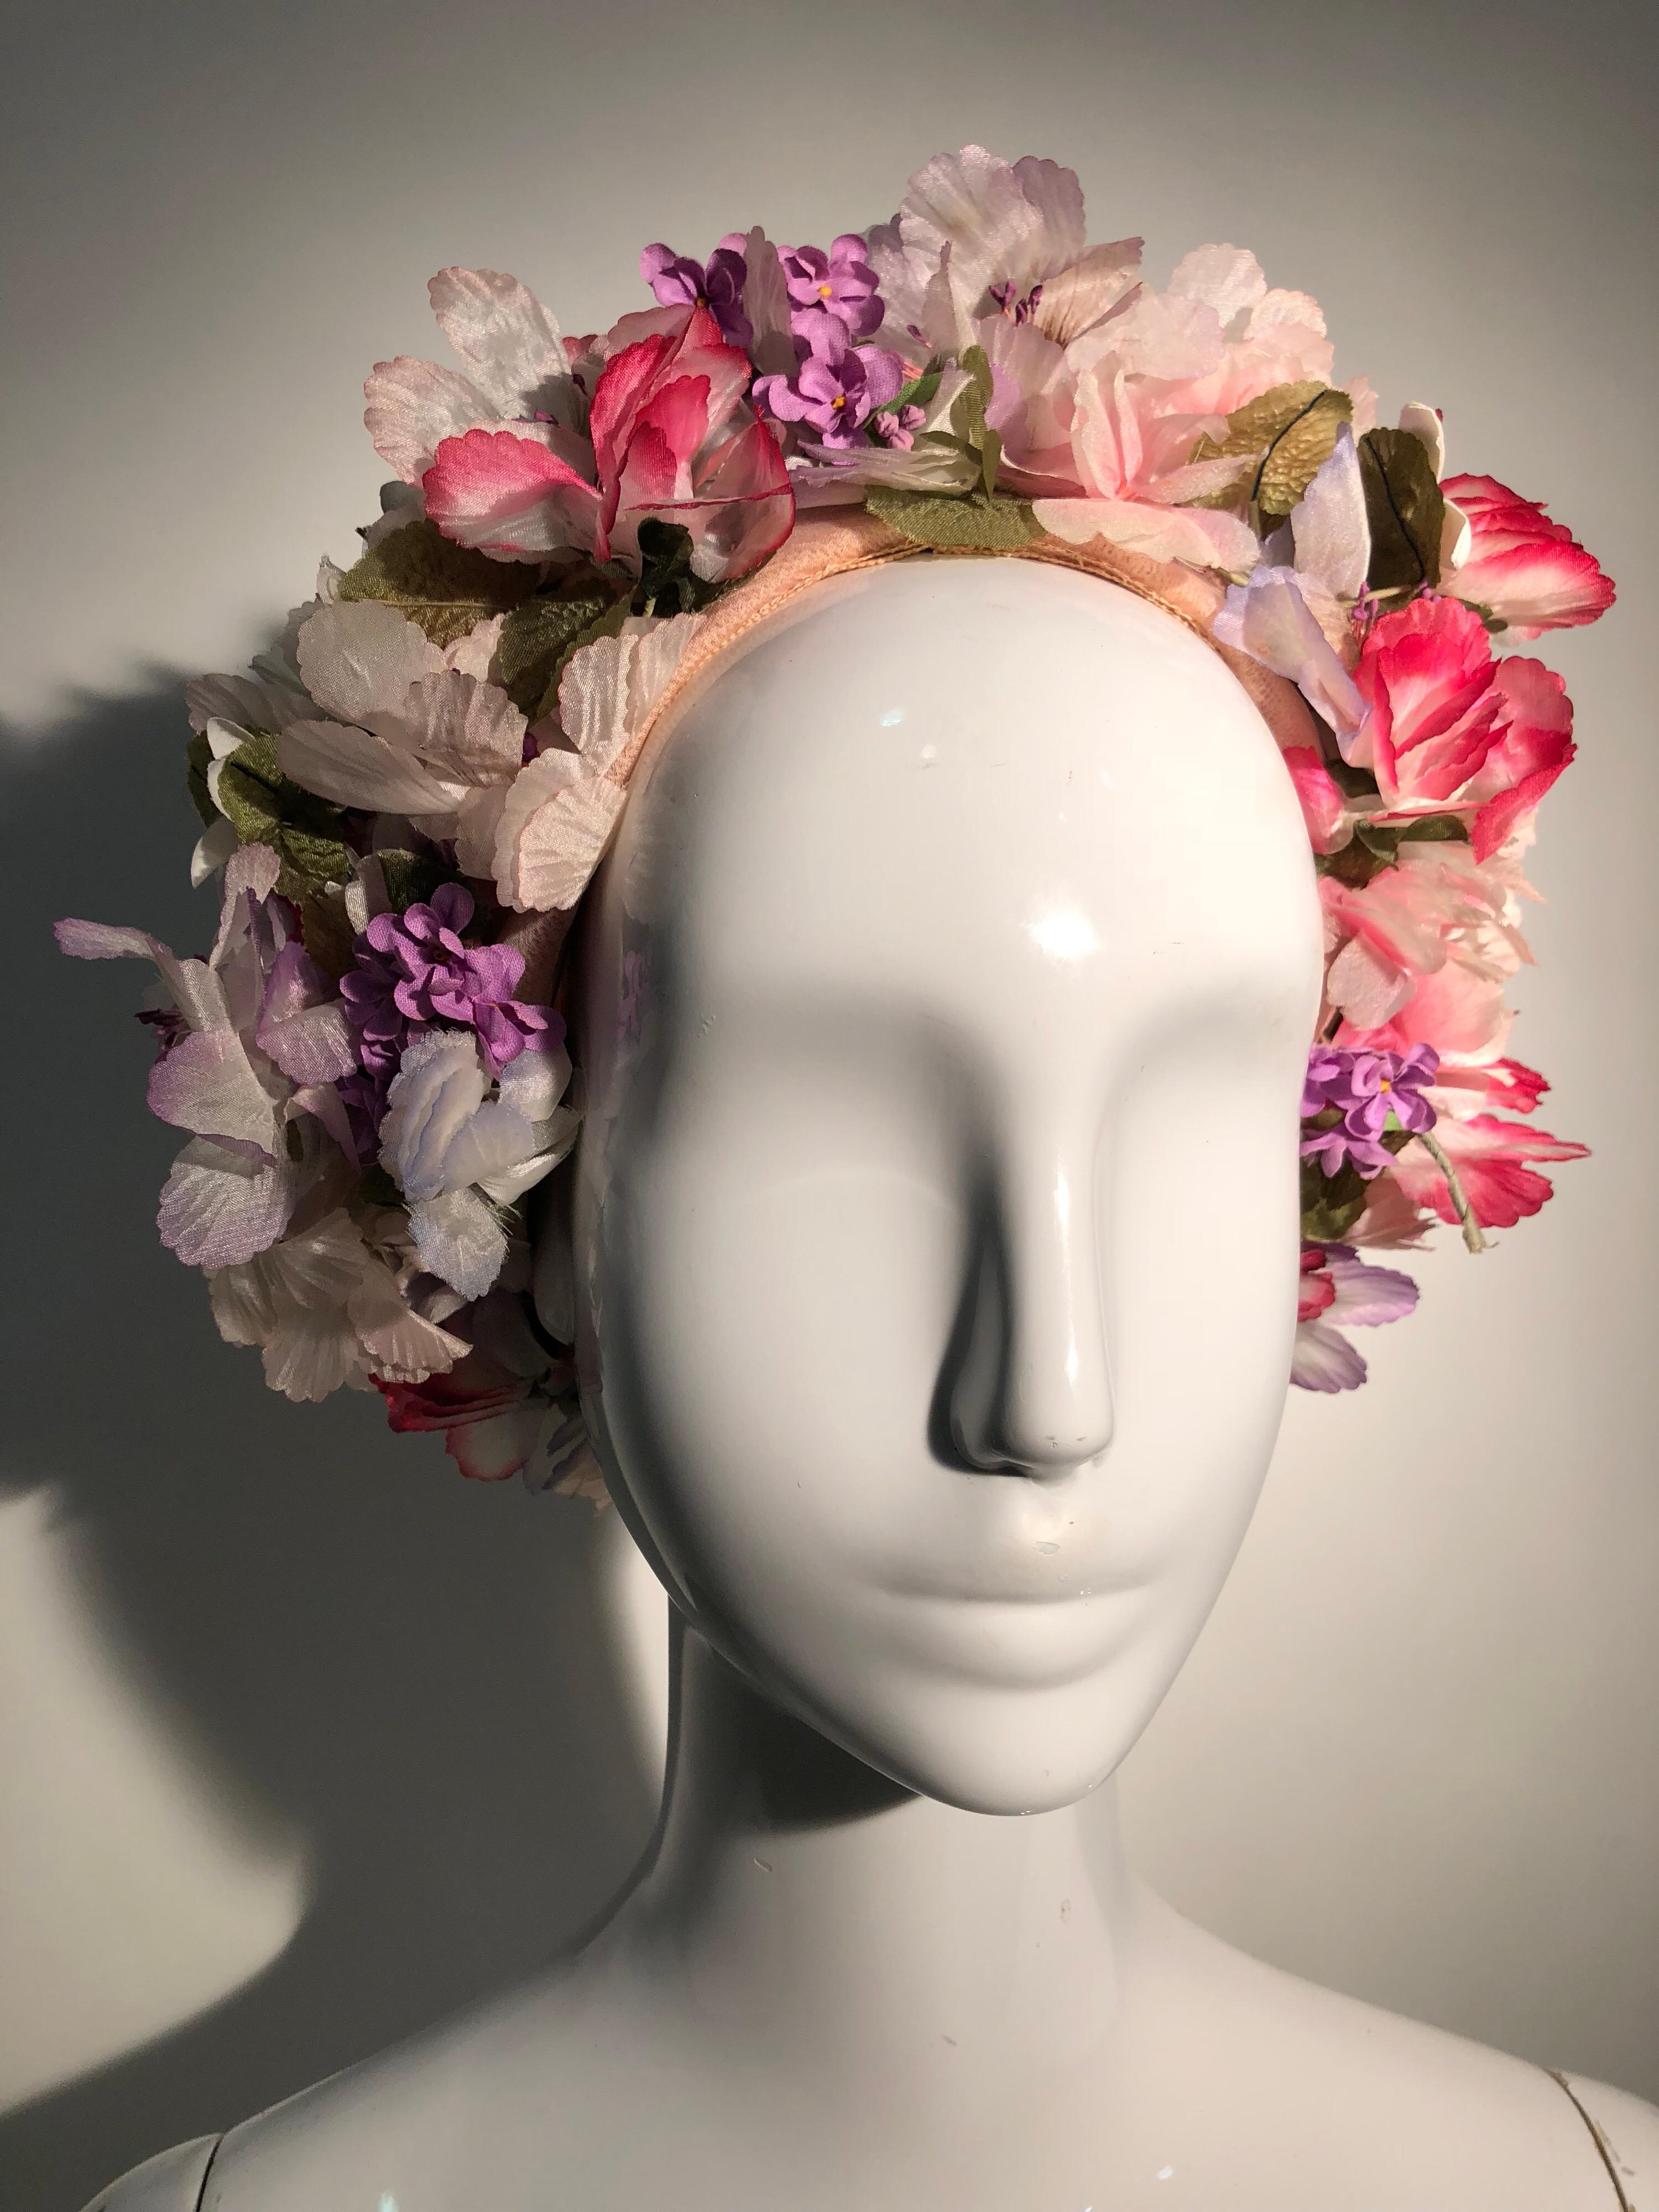 A beautiful never-worn 1960s Elsa Schiaparelli spring hat of wrapped straw and silken floss, in shades of pale pink,  with a heavy band of beautiful silk flowers at the edge. Still has original Shocking Pink Schiaparelli hang tag!